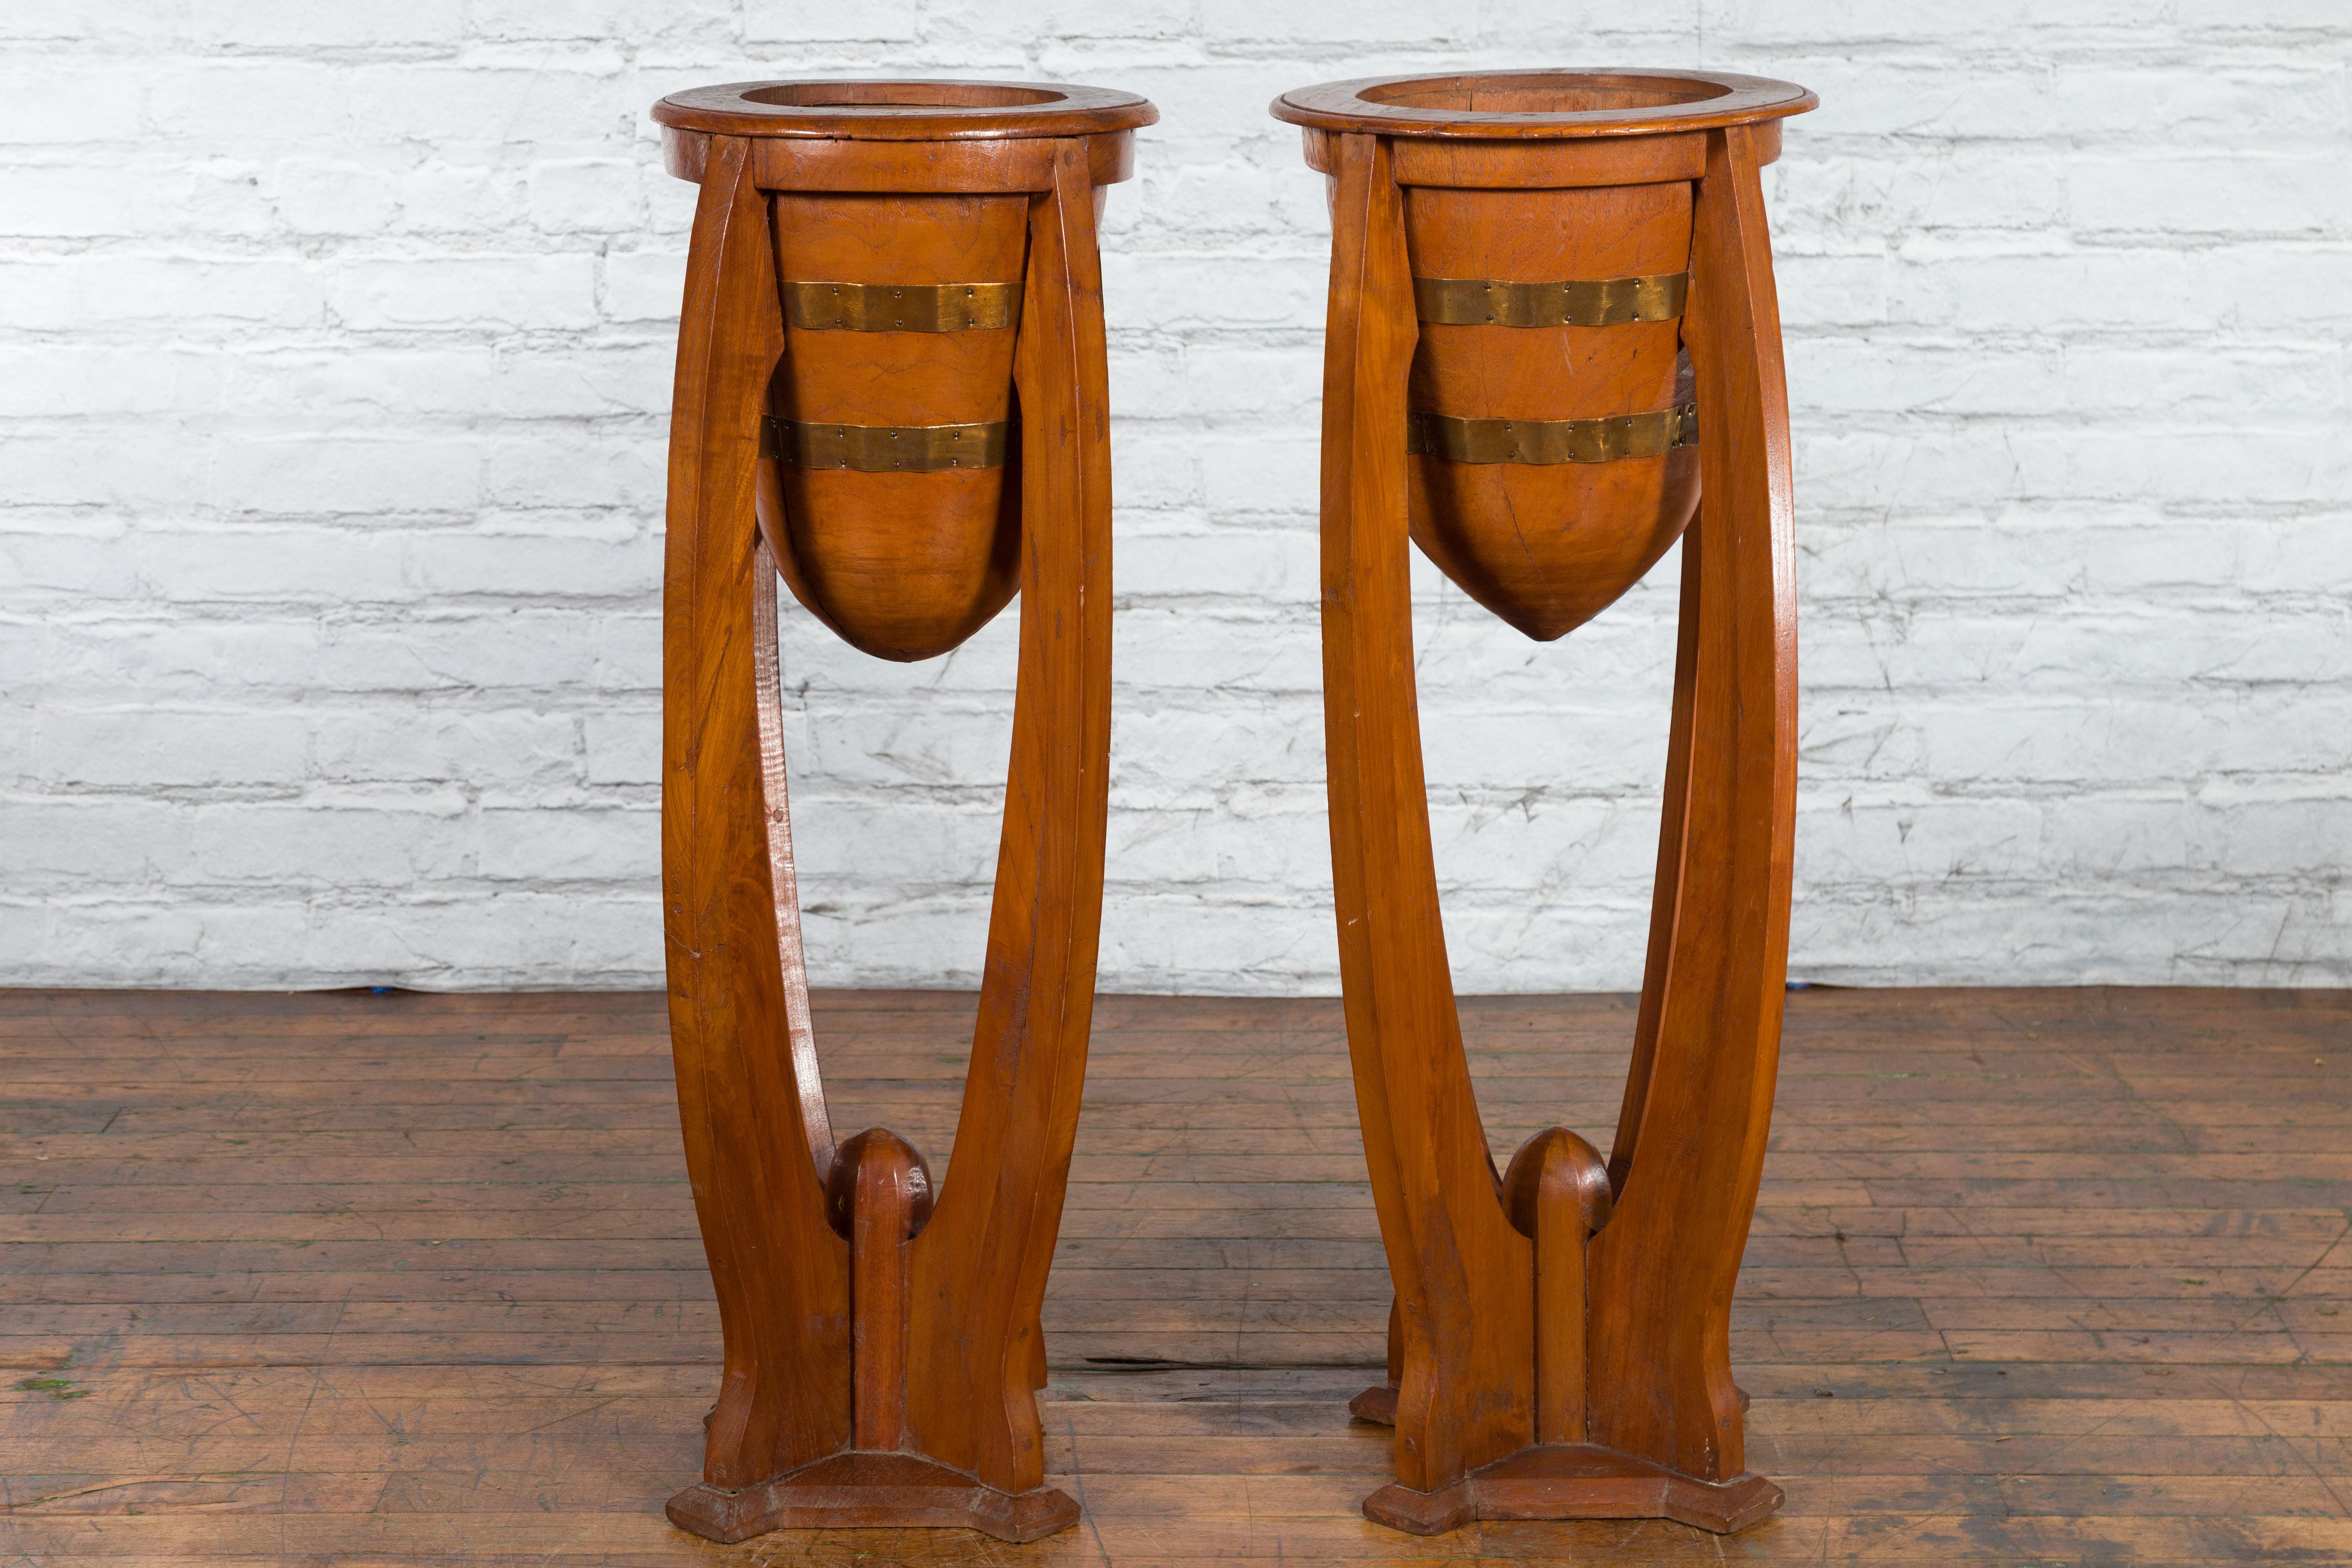 A pair of Javanese Art Deco style teak wood plant stands from the 20th century, with tall proportions, horizontal brass braces and curving bases. Created on the island of Java during the 20th century, this pair of large planters charms us with their